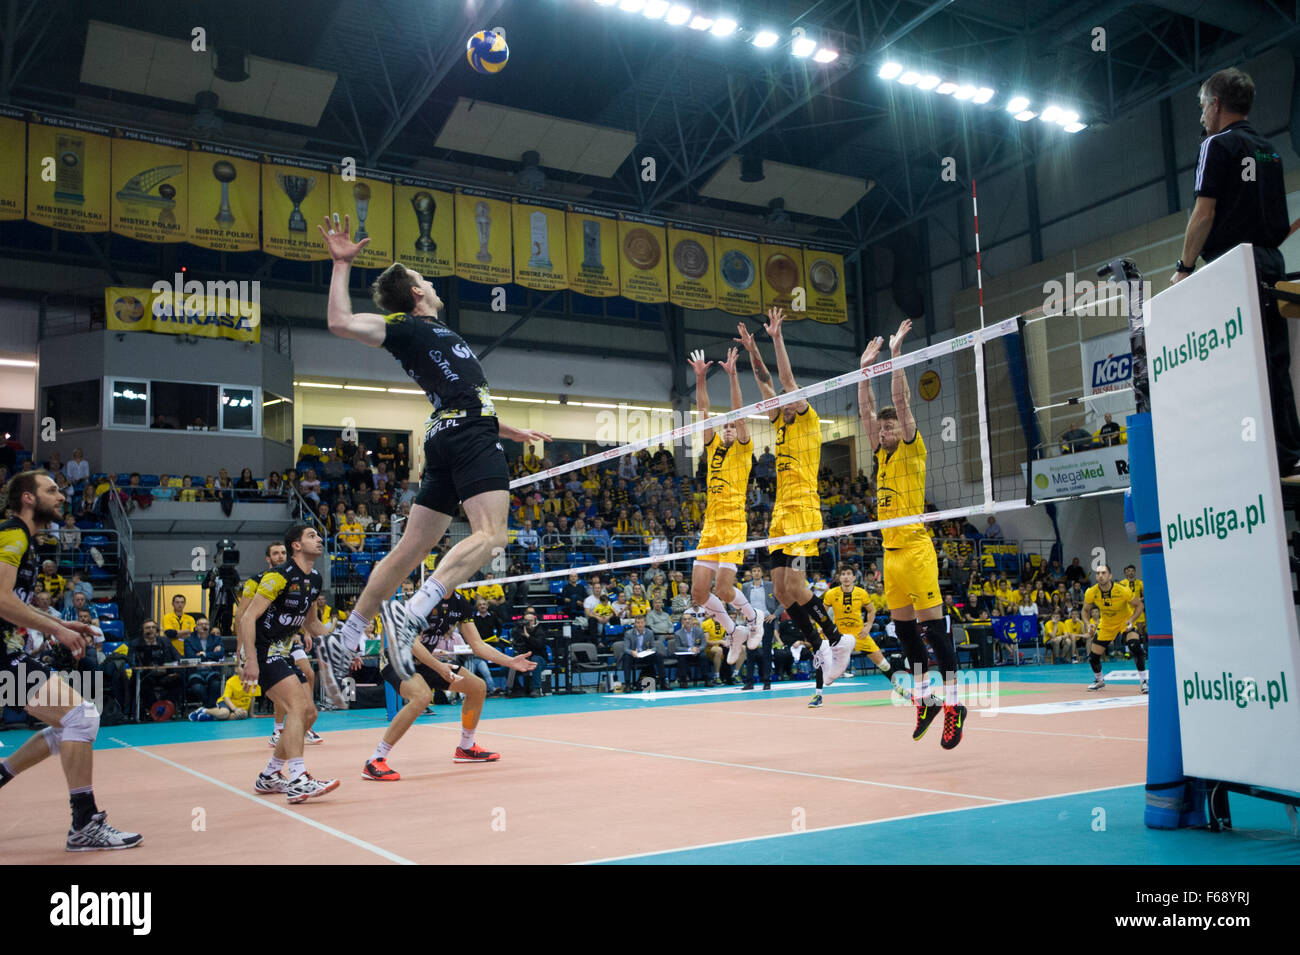 Belchatow, Poland. 14th November 2015. Murphy Troy of Lotos Trefl Gdansk, spikes during a game against  PGE Skra Belchatow in the Plus Liga Polish Professional Volleyball League. Team PGE Skra went on to win 3-0. Credit:  Marcin Rozpedowski/Alamy Live News Stock Photo